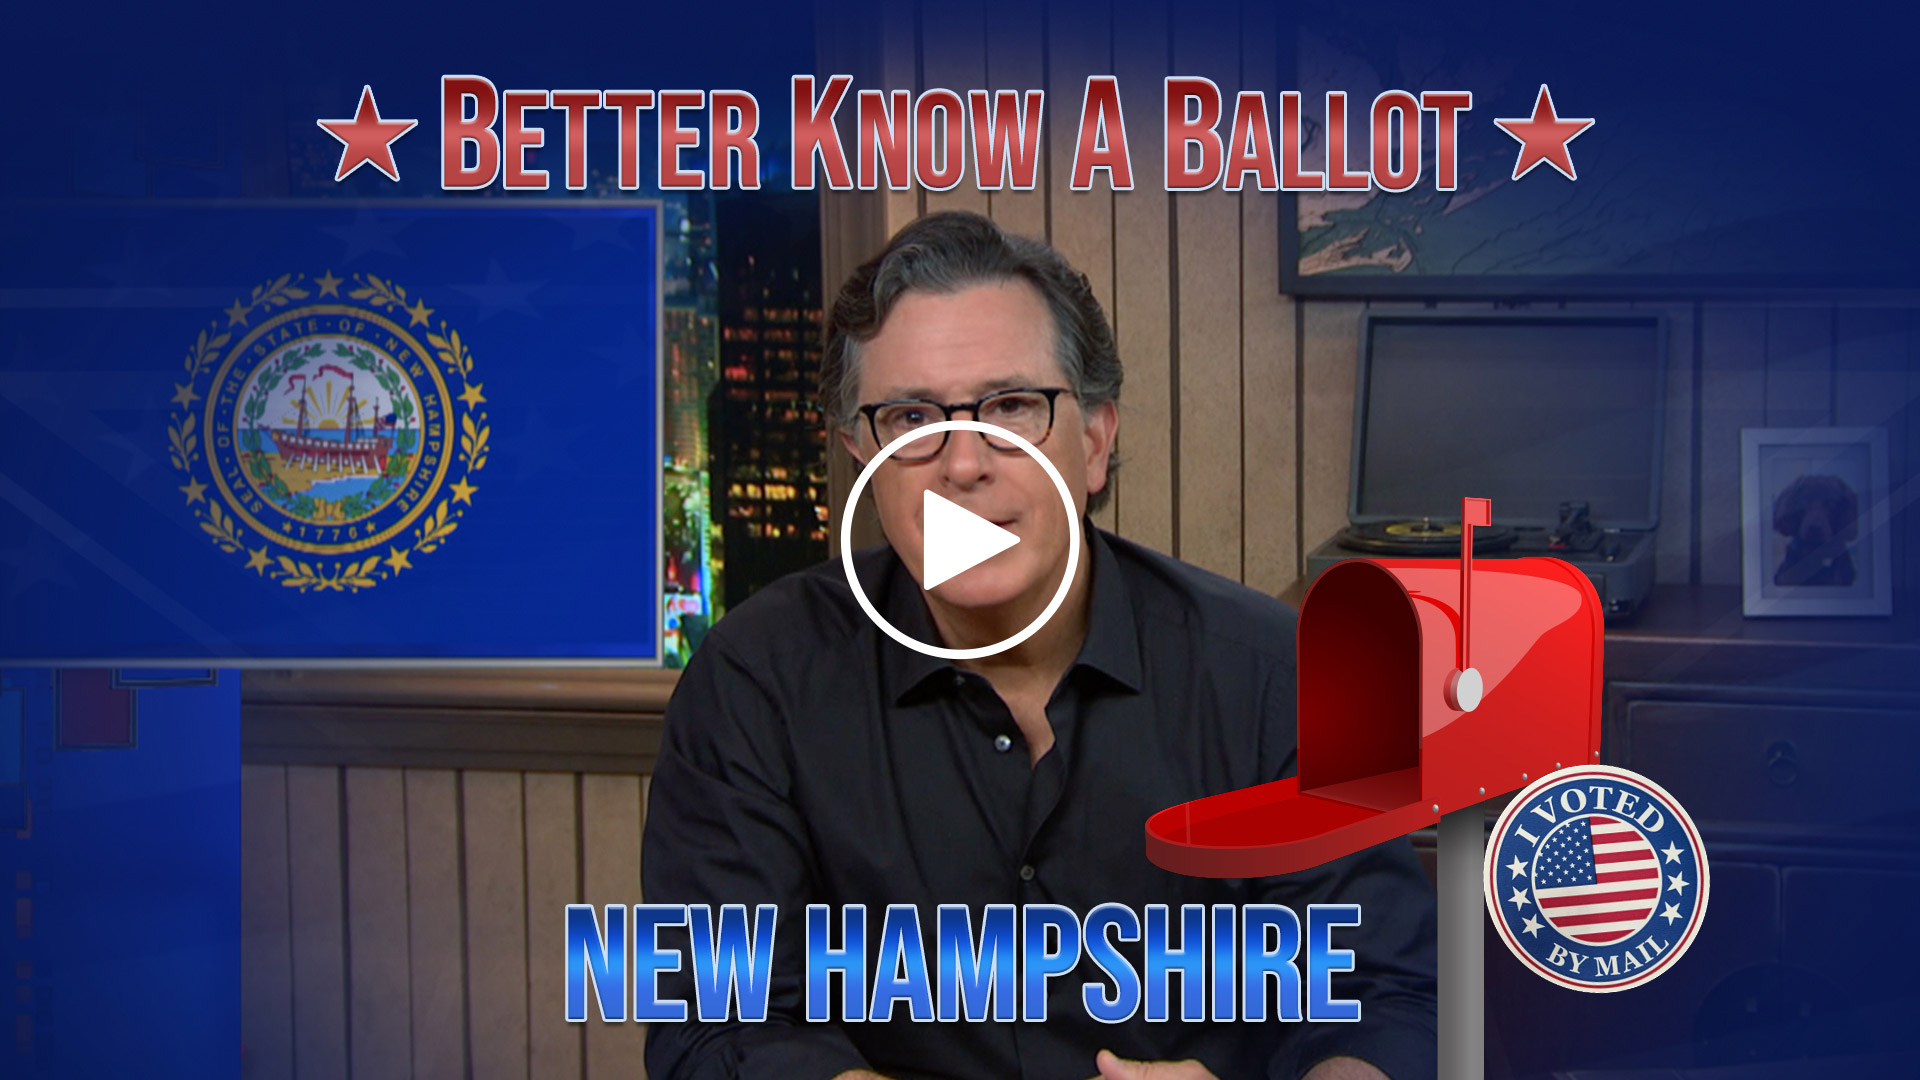 A MESSAGE FROM STEPHEN COLBERT FOR THE 2020 ELECTION.